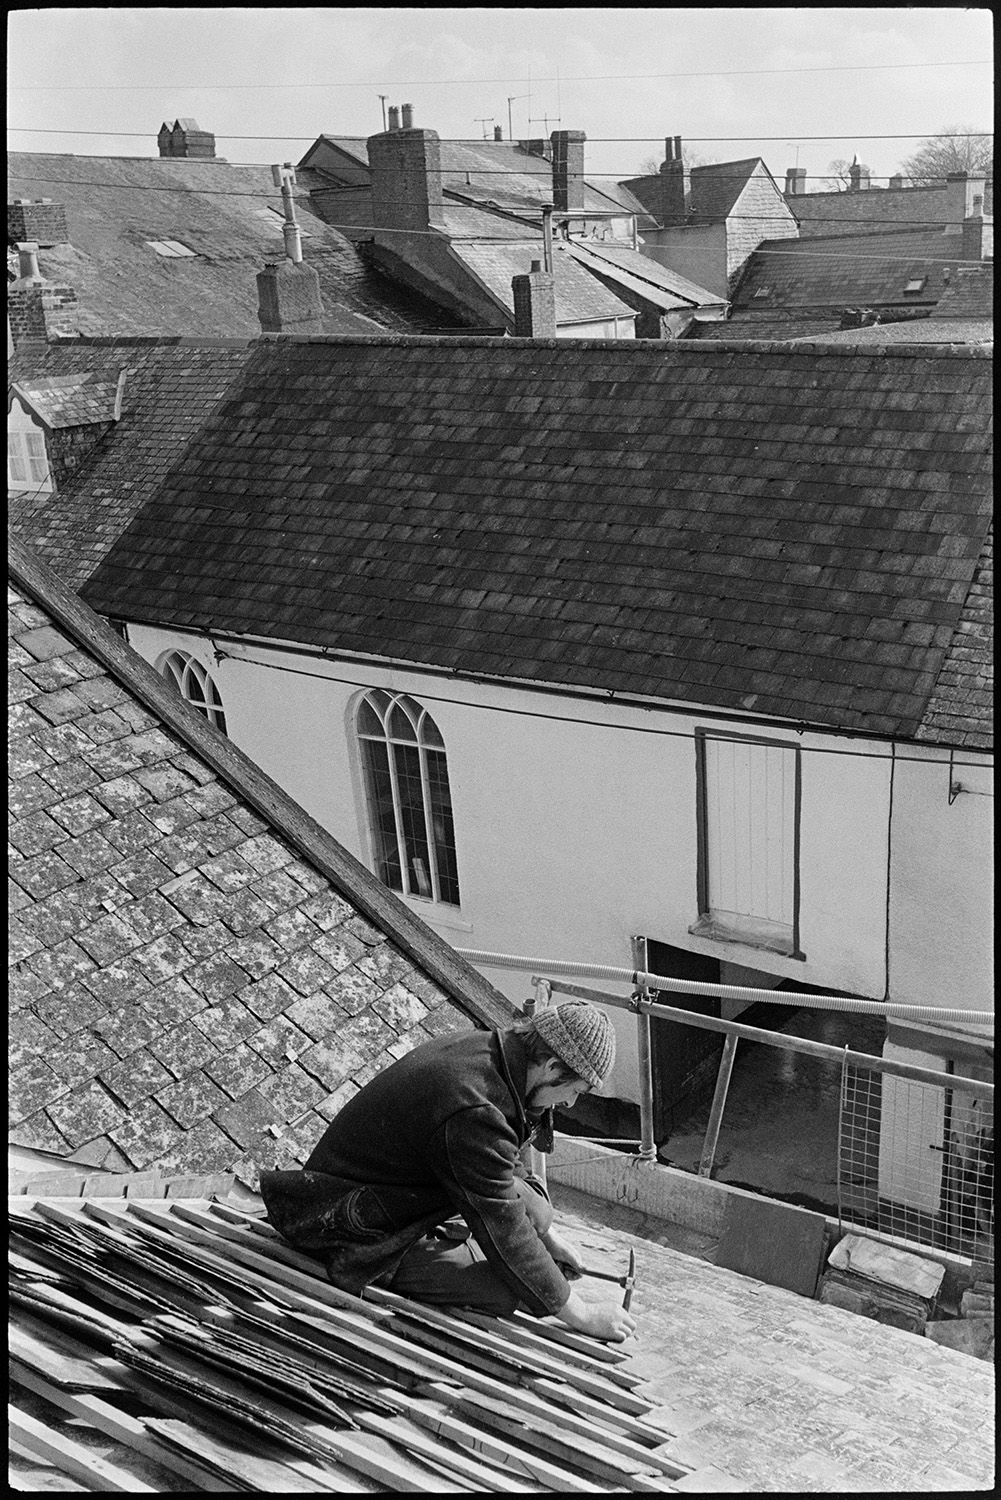 Builders re-slating roof and building dormer window.
[Chris Hiscock re-slating the roof of Western House, New Street, Chulmleigh. The work was done to create a dark room for James Ravilious. Other buildings can be seen in the background.]